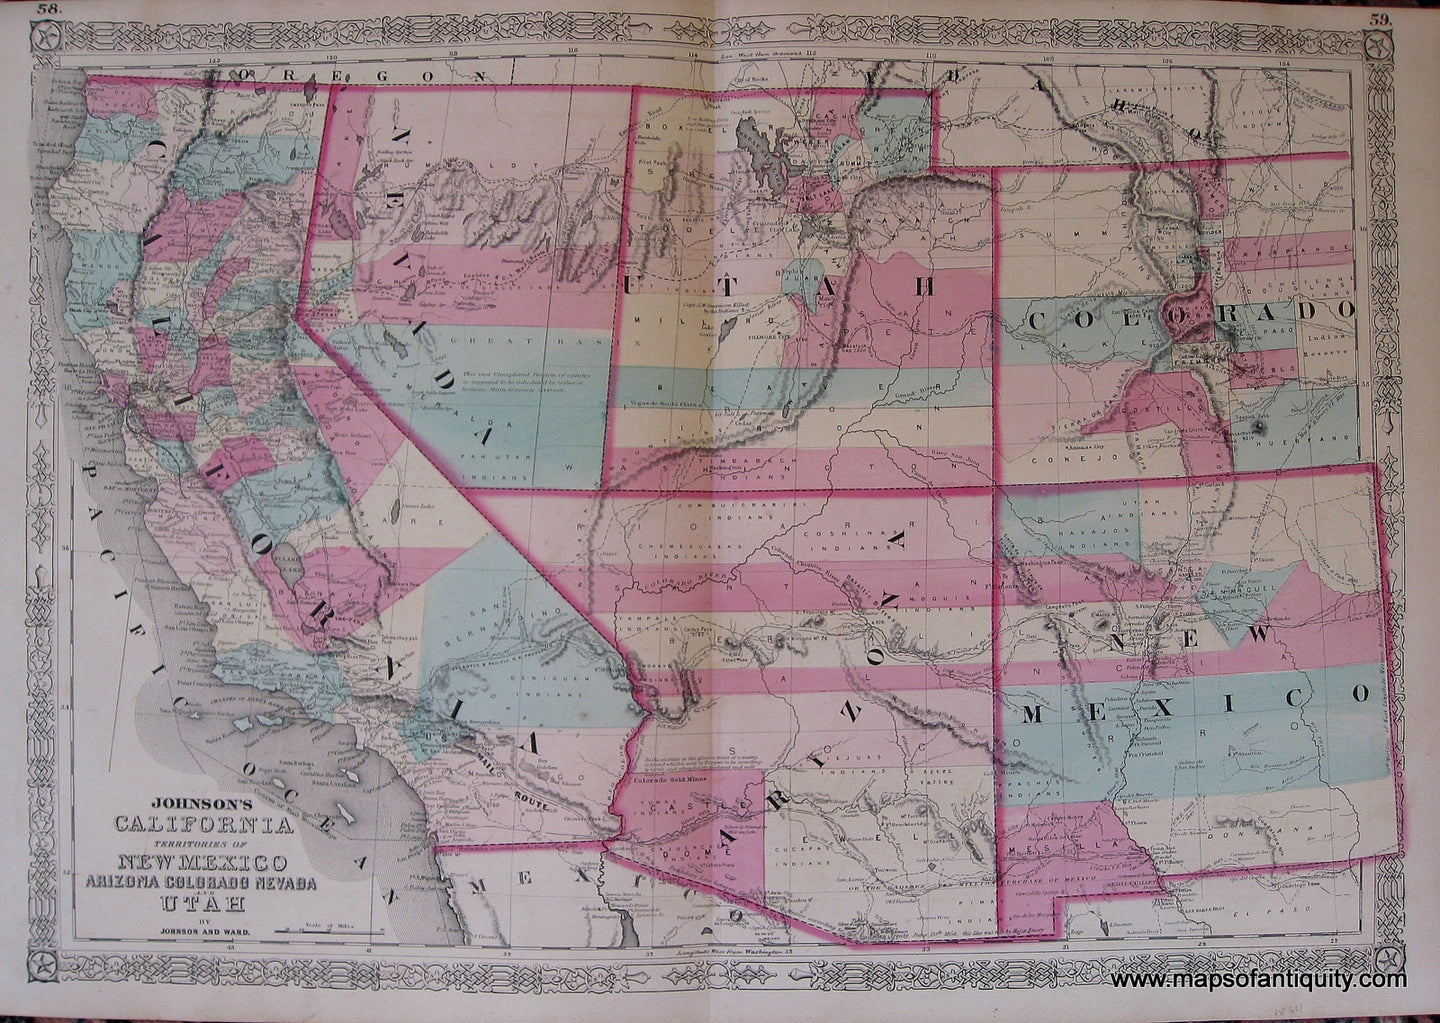 Antique-Hand-Colored-Map-Johnson's-California-Territories-of-New-Mexico-Arizona-Colorado-Nevada-and-Utah.-**********-United-States-West-General-1863-Johnson-Maps-Of-Antiquity